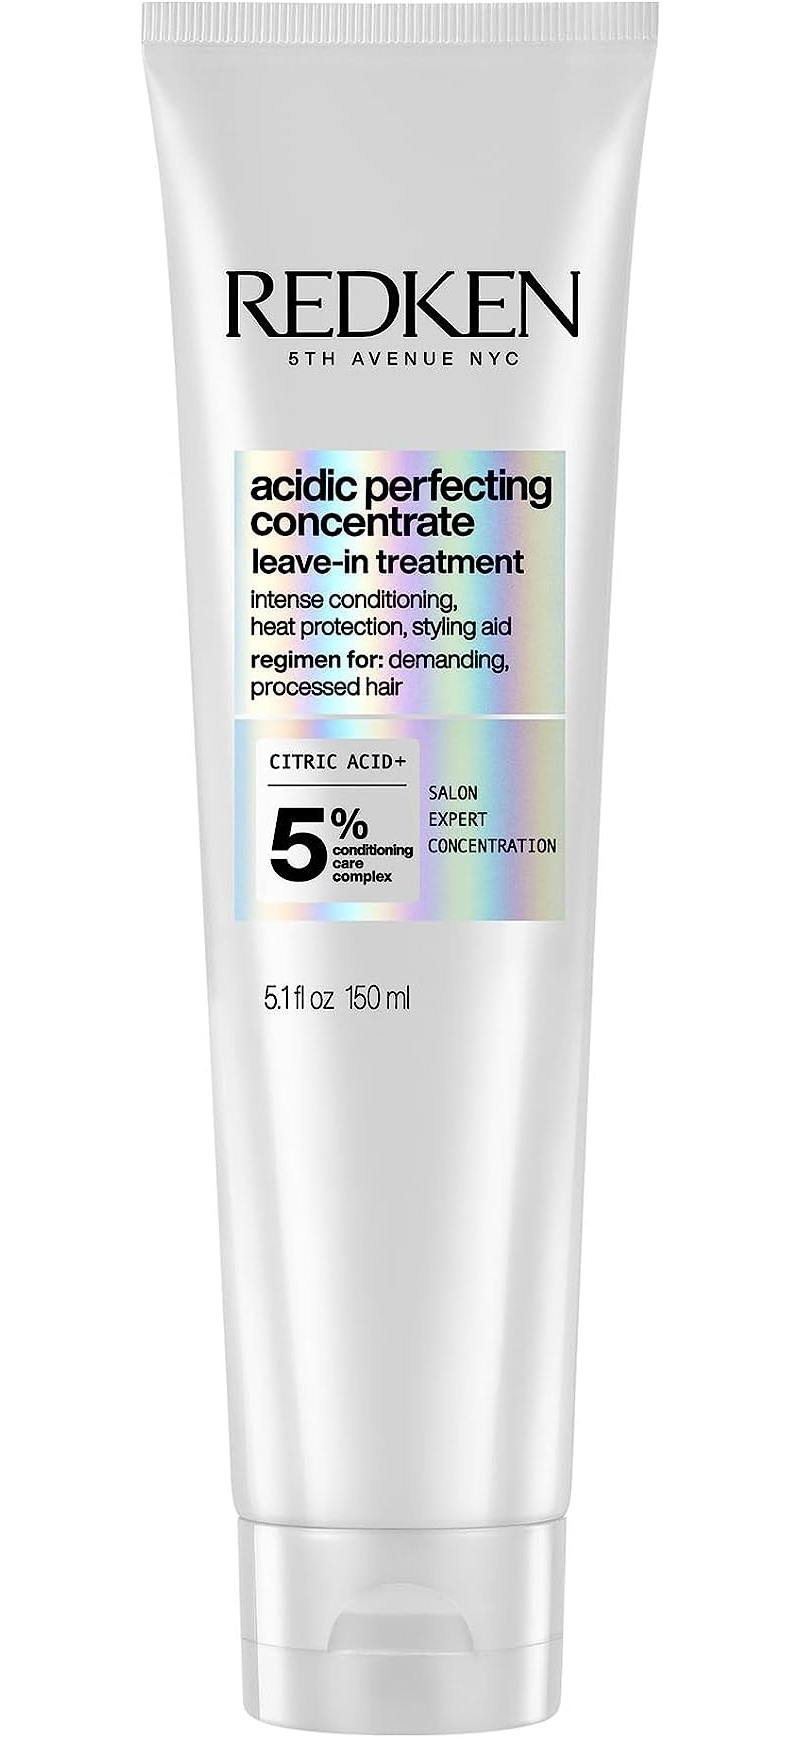 redken acidic perfecting leave-in treatment lotion 150ml